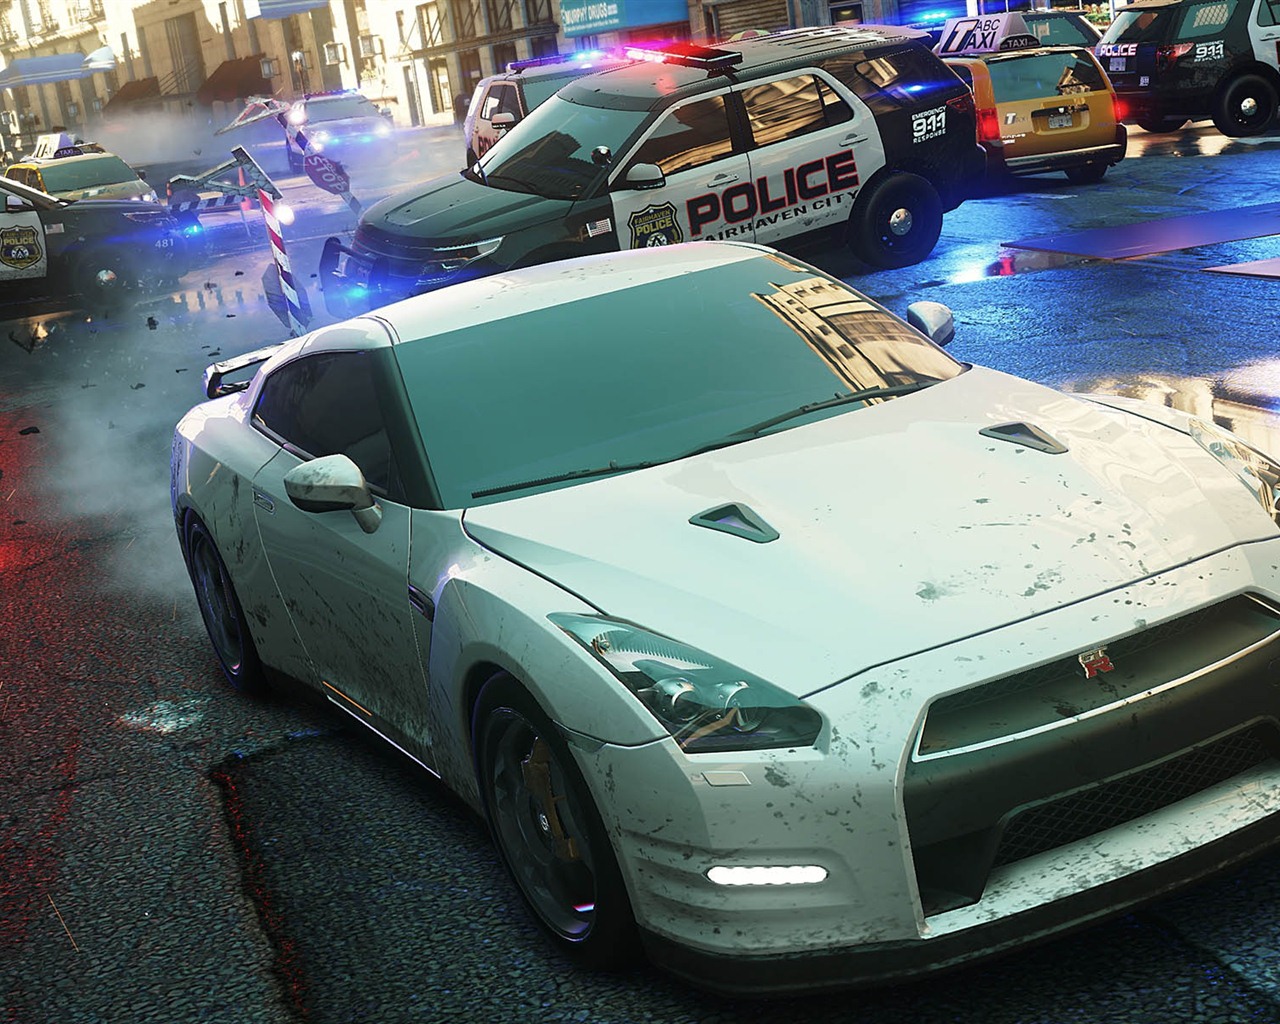 Need for Speed: Most Wanted 极品飞车17：最高通缉 高清壁纸11 - 1280x1024